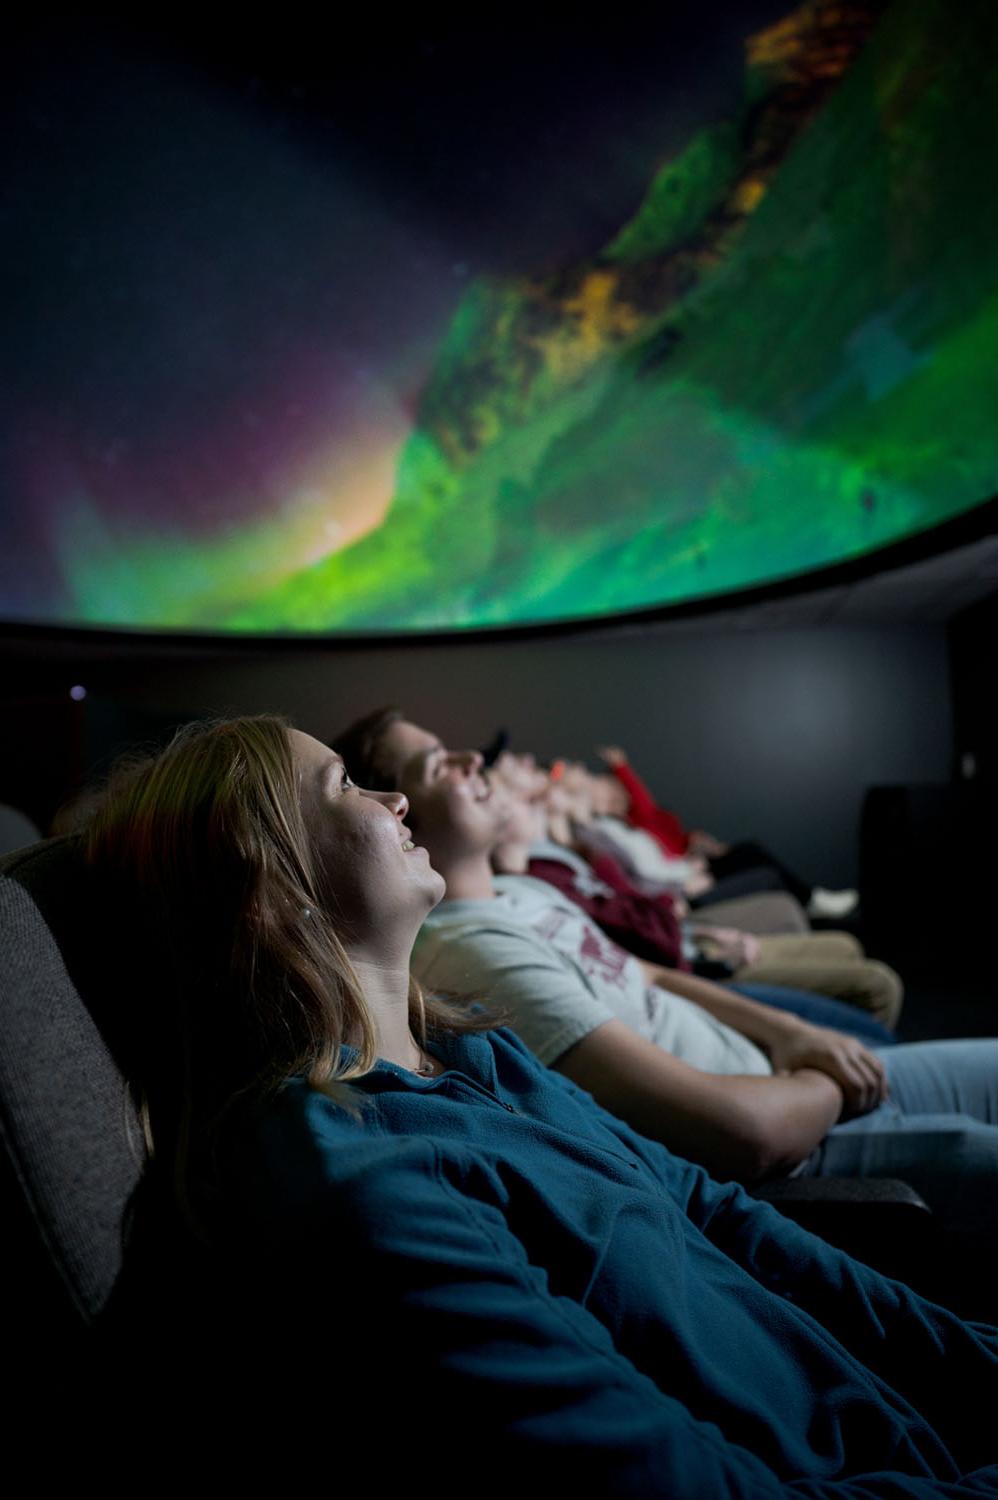 Students watch a show in the planetarium